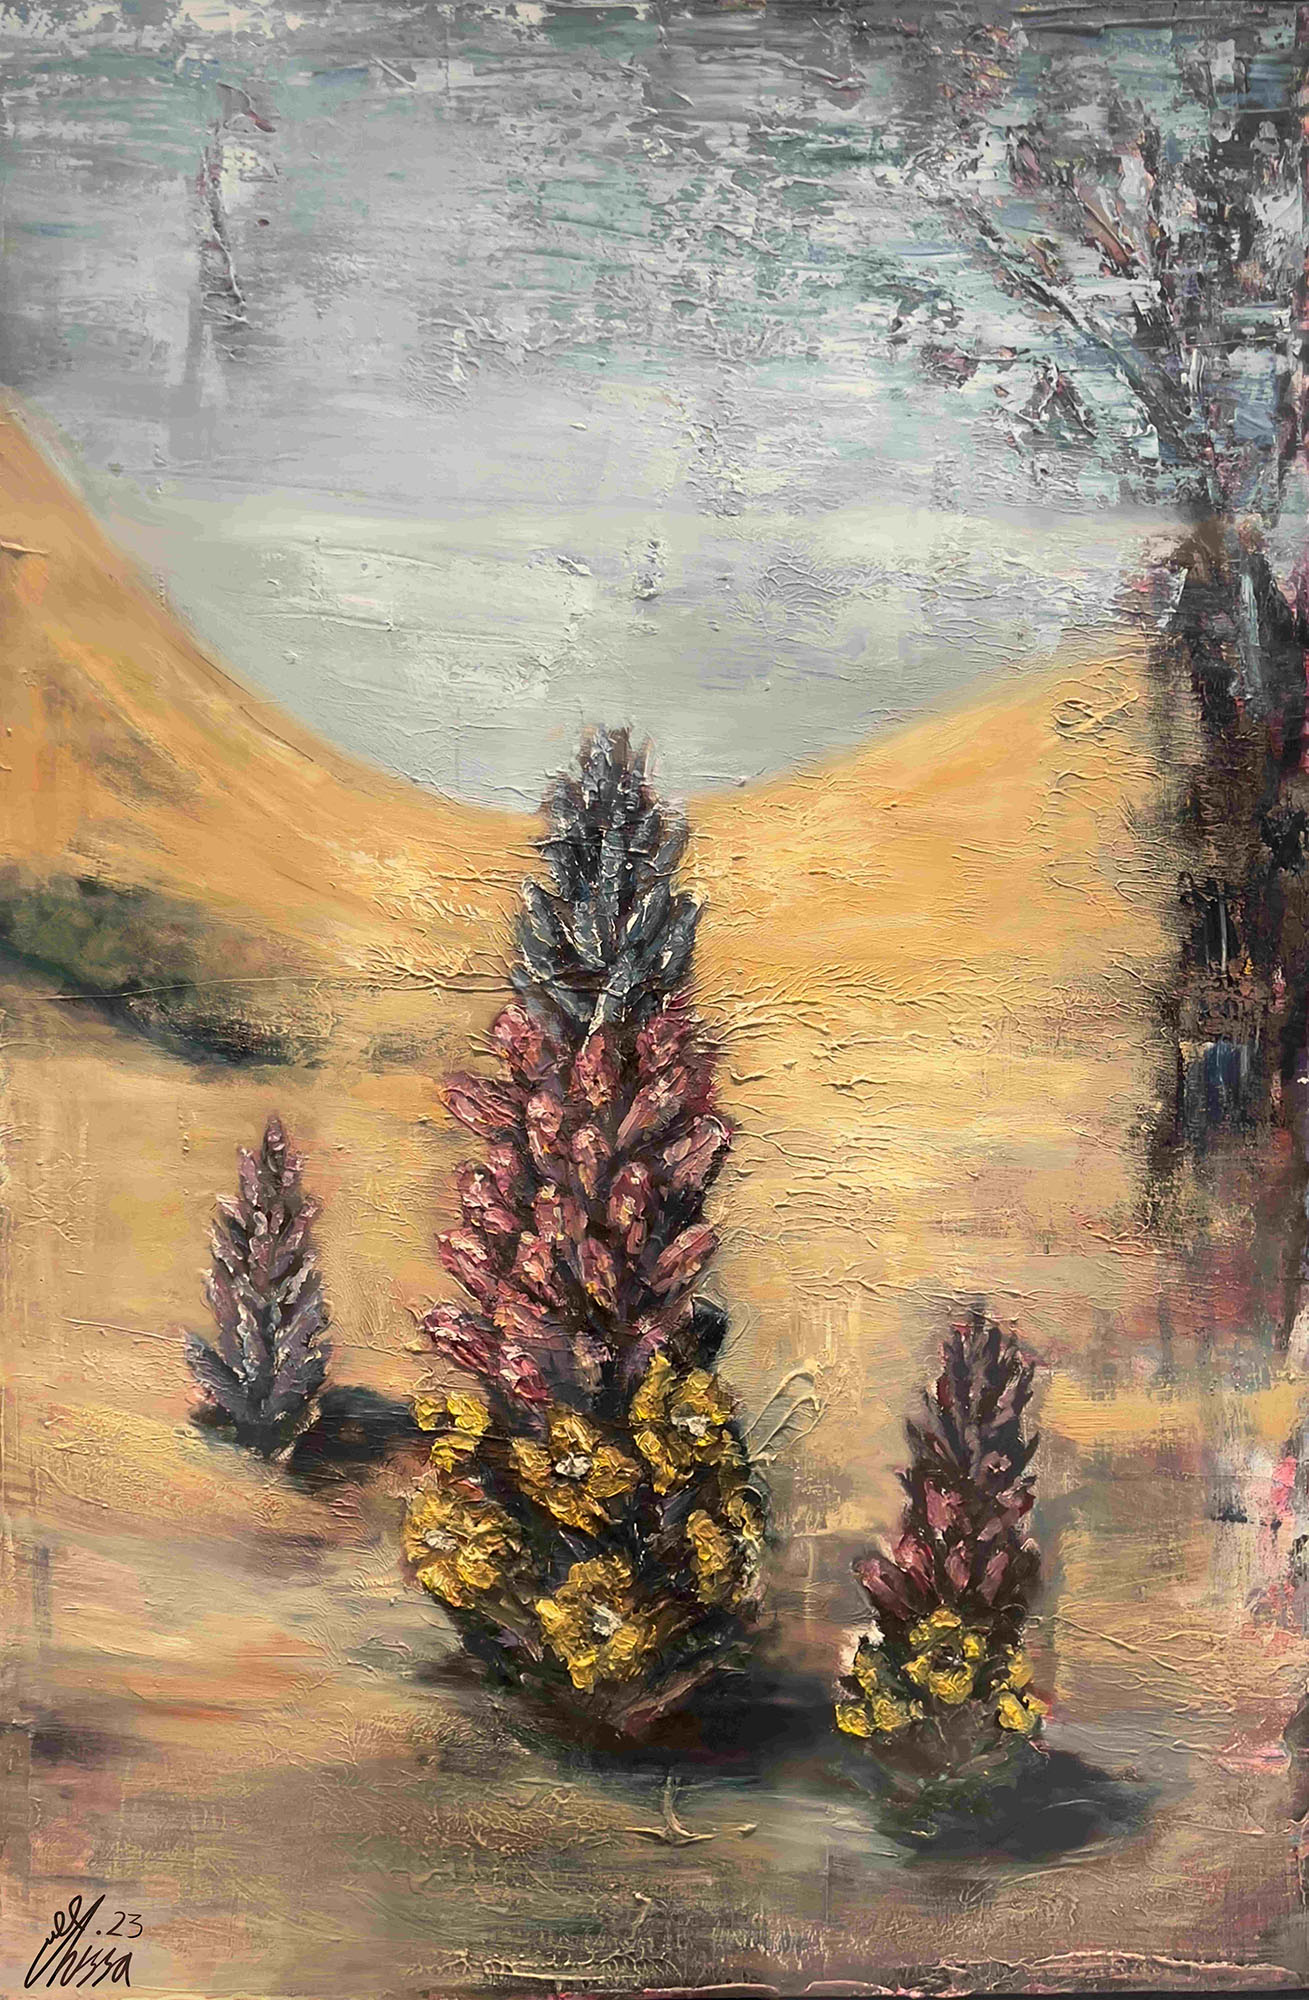 A painting of a plant in the desert landscape with rising hills in the background